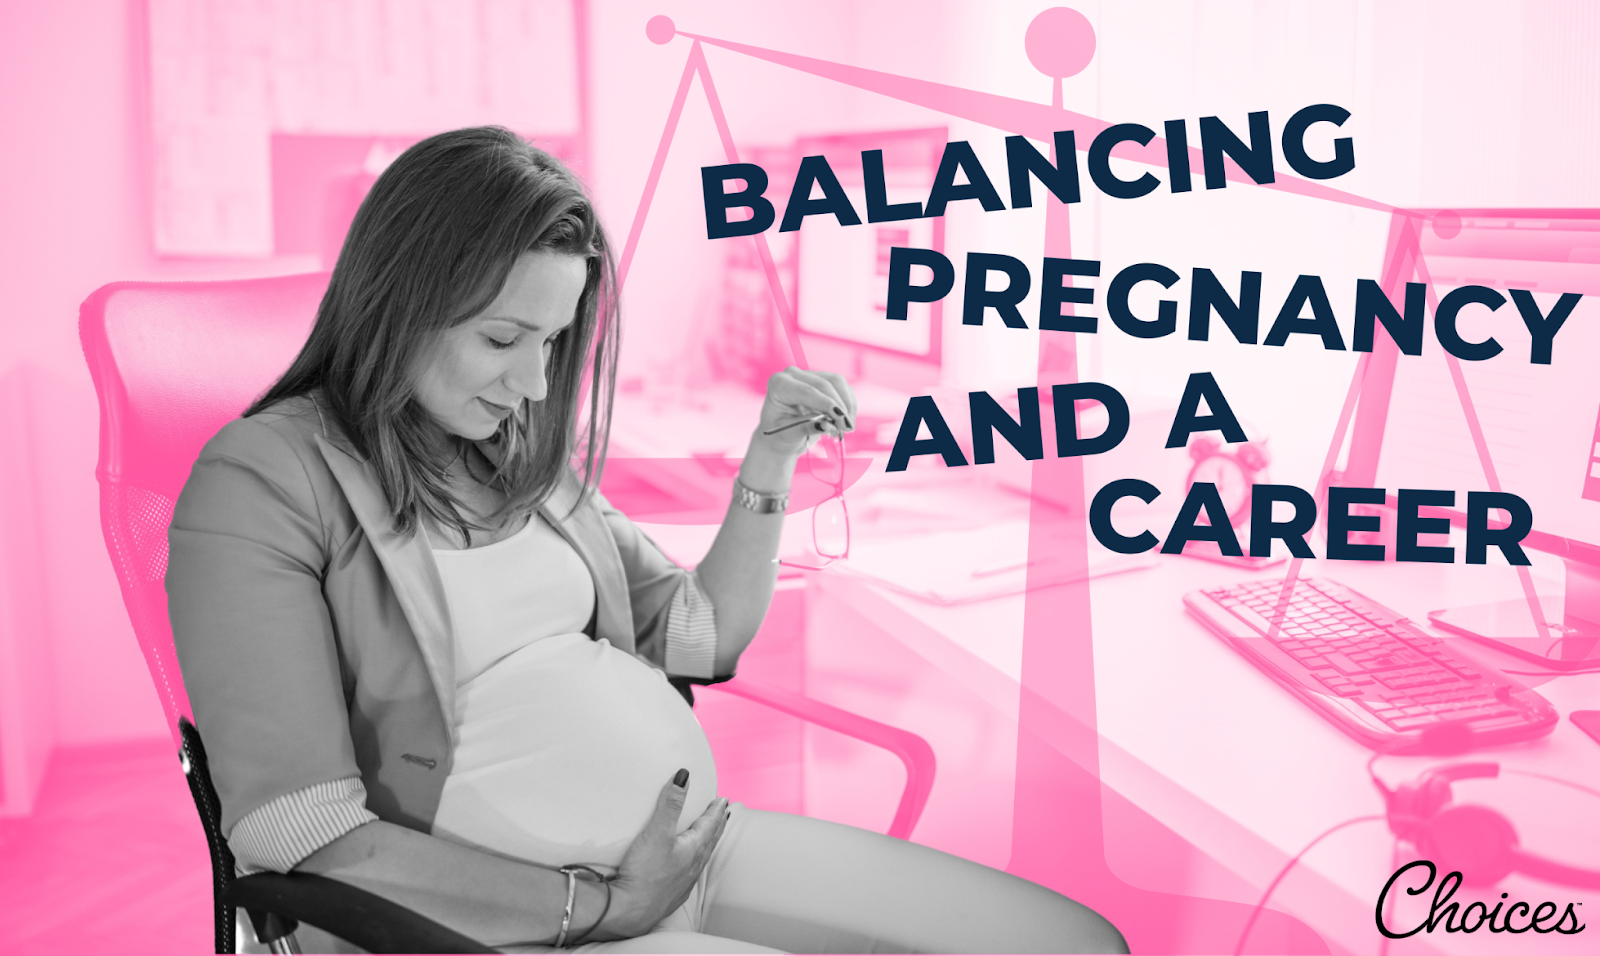 Four Tips for Balancing an Unplanned Pregnancy and a Career